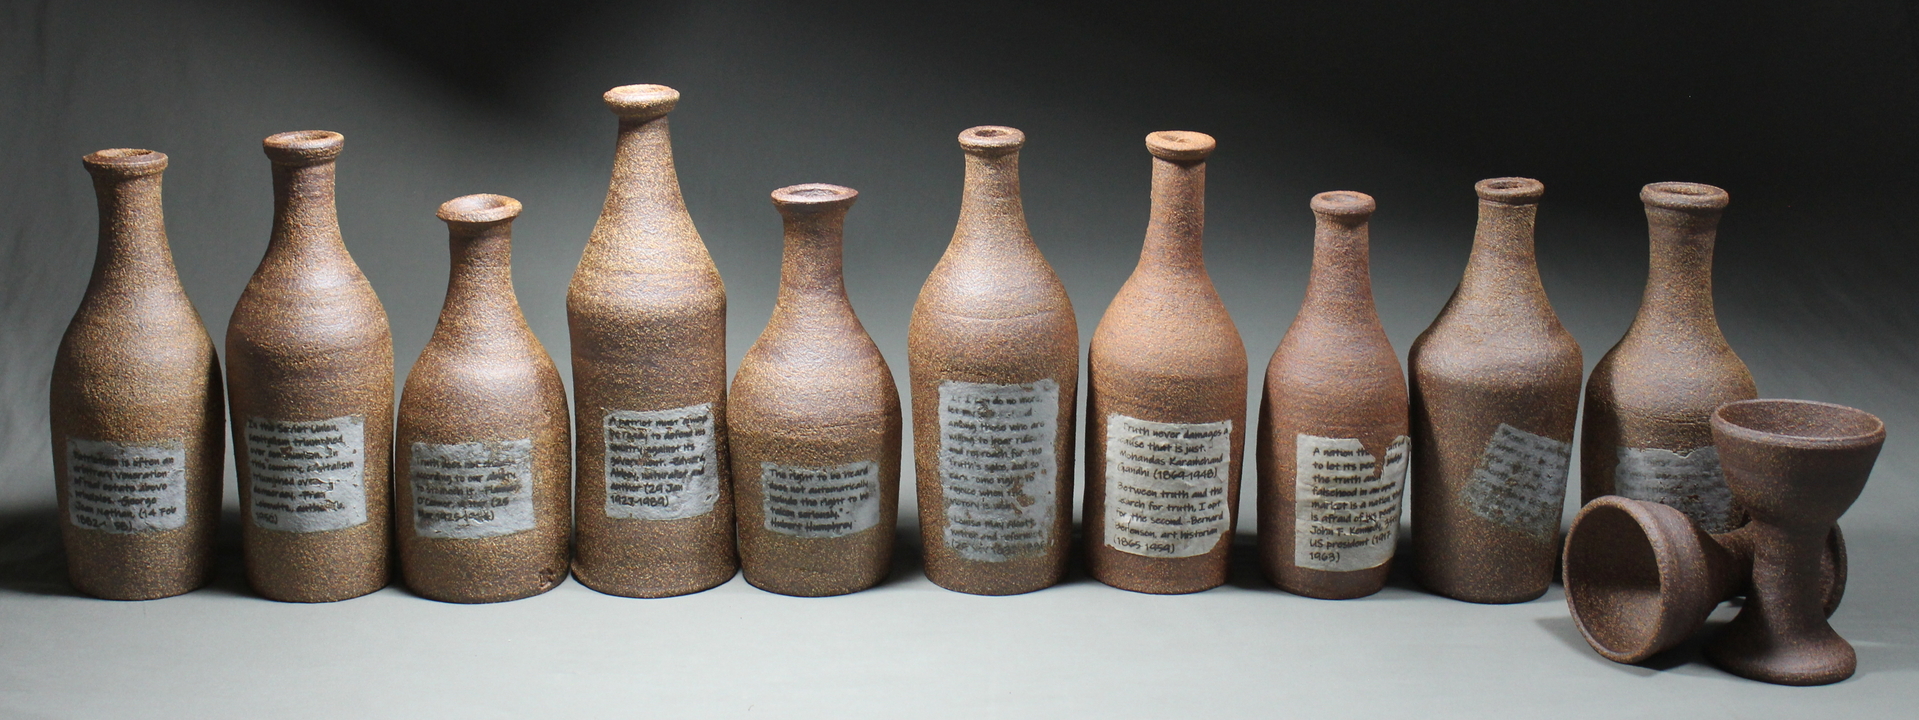 12 various sizes brown clay jugs and 2 chalices. The jugs have a piece of paper plastered on the front of them with a short blurb of text on it.